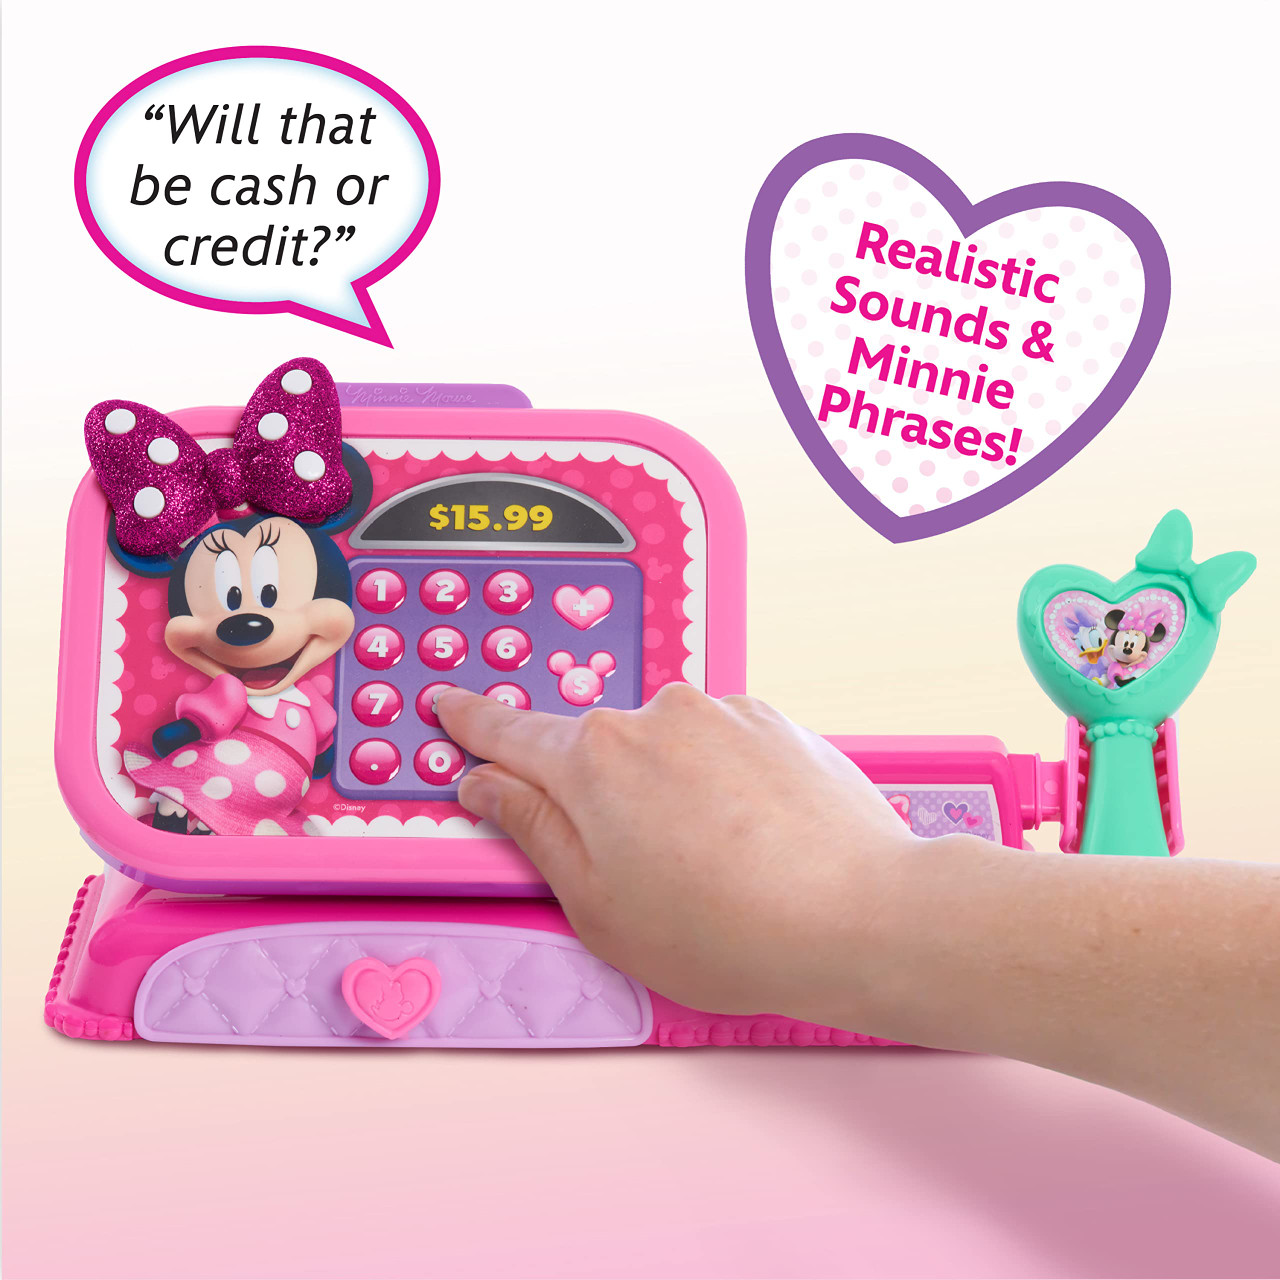 Disney Junior Minnie Mouse Bowfabulous Bag Set, 9 Piece Pretend Play Purse with Lights and Sounds Cell Phone, Sunglasses, and Accessories, by Just